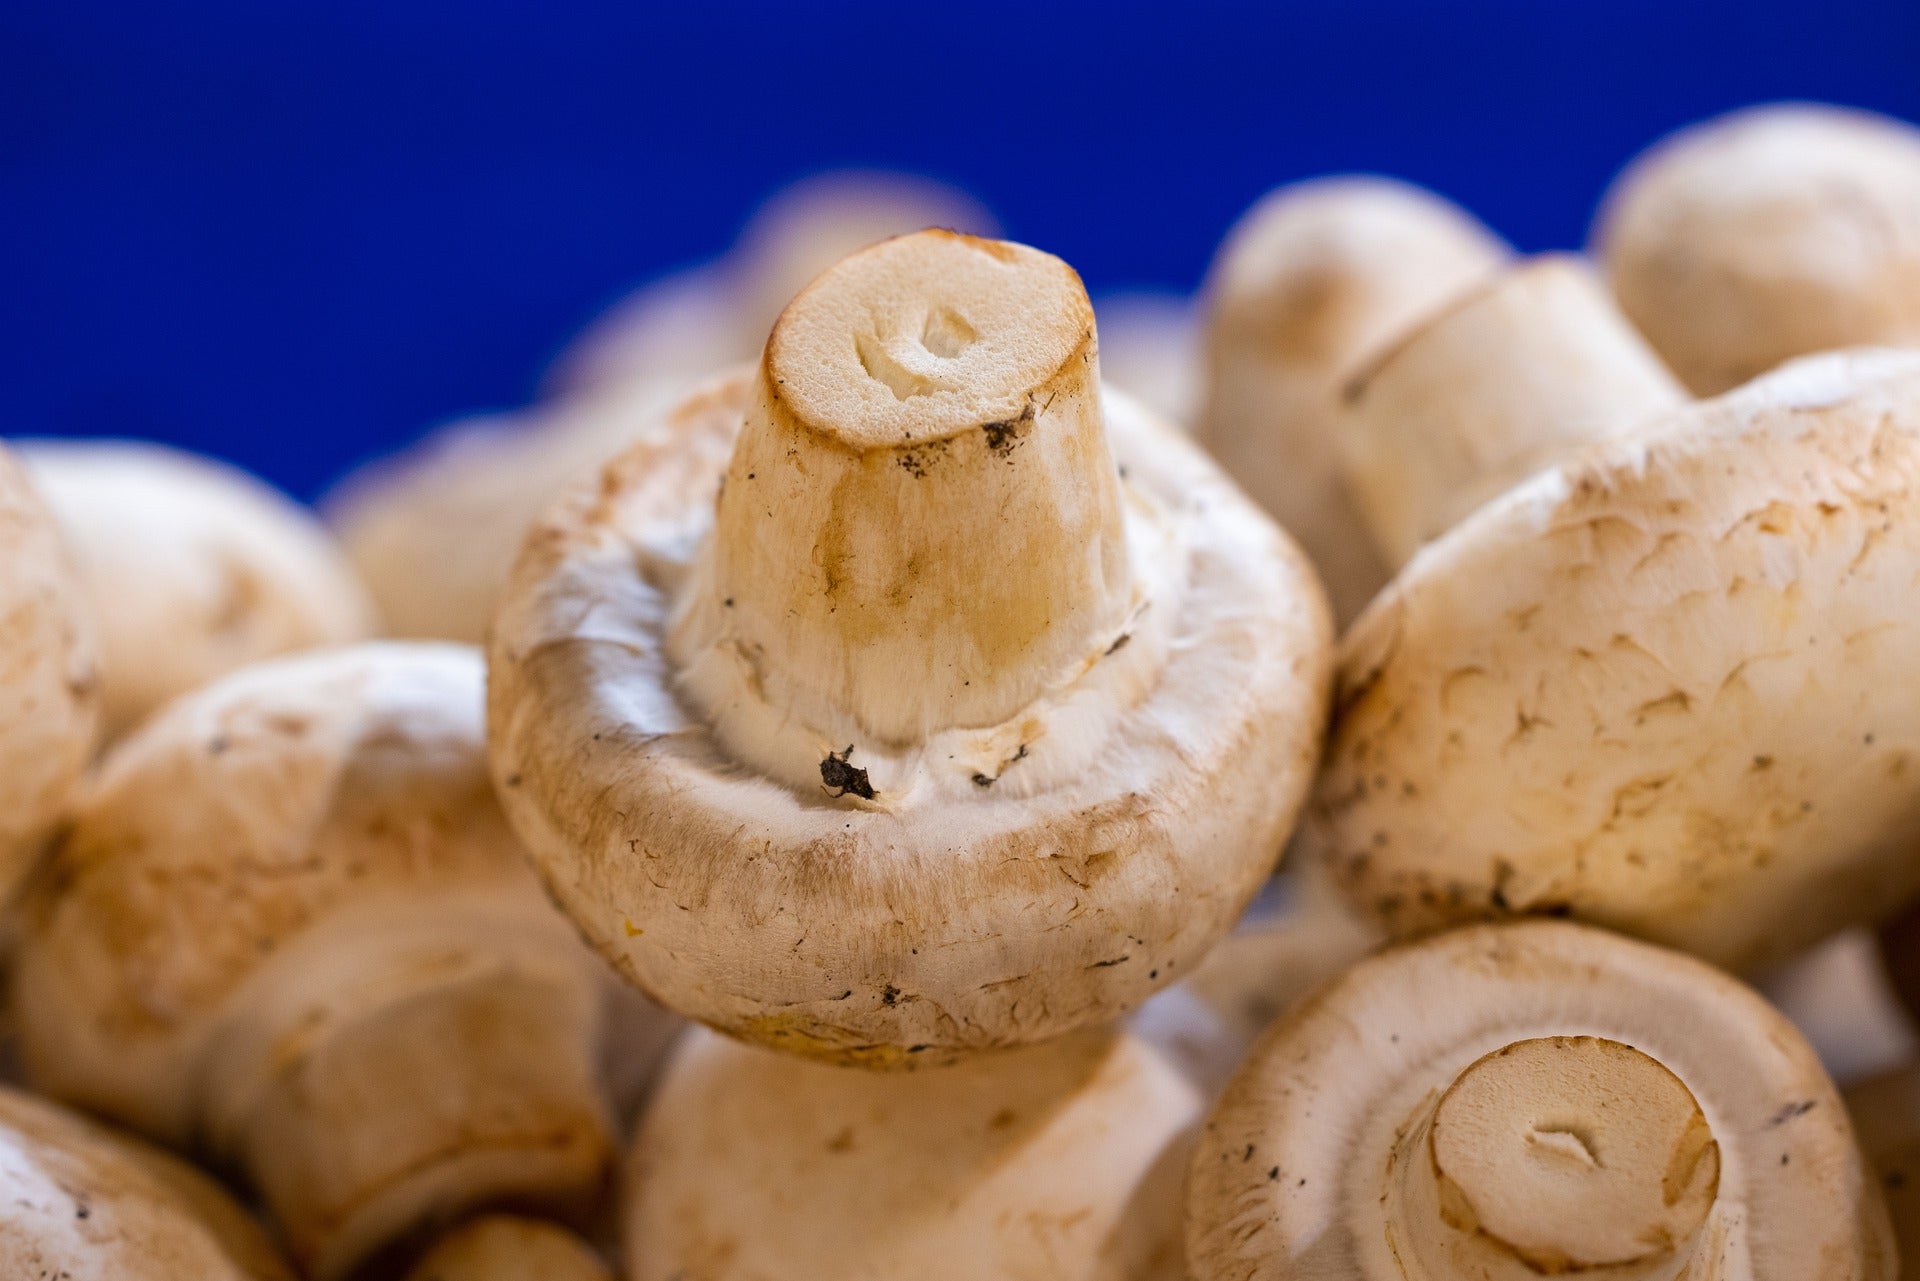 Can Family Cut out's Mushrooms